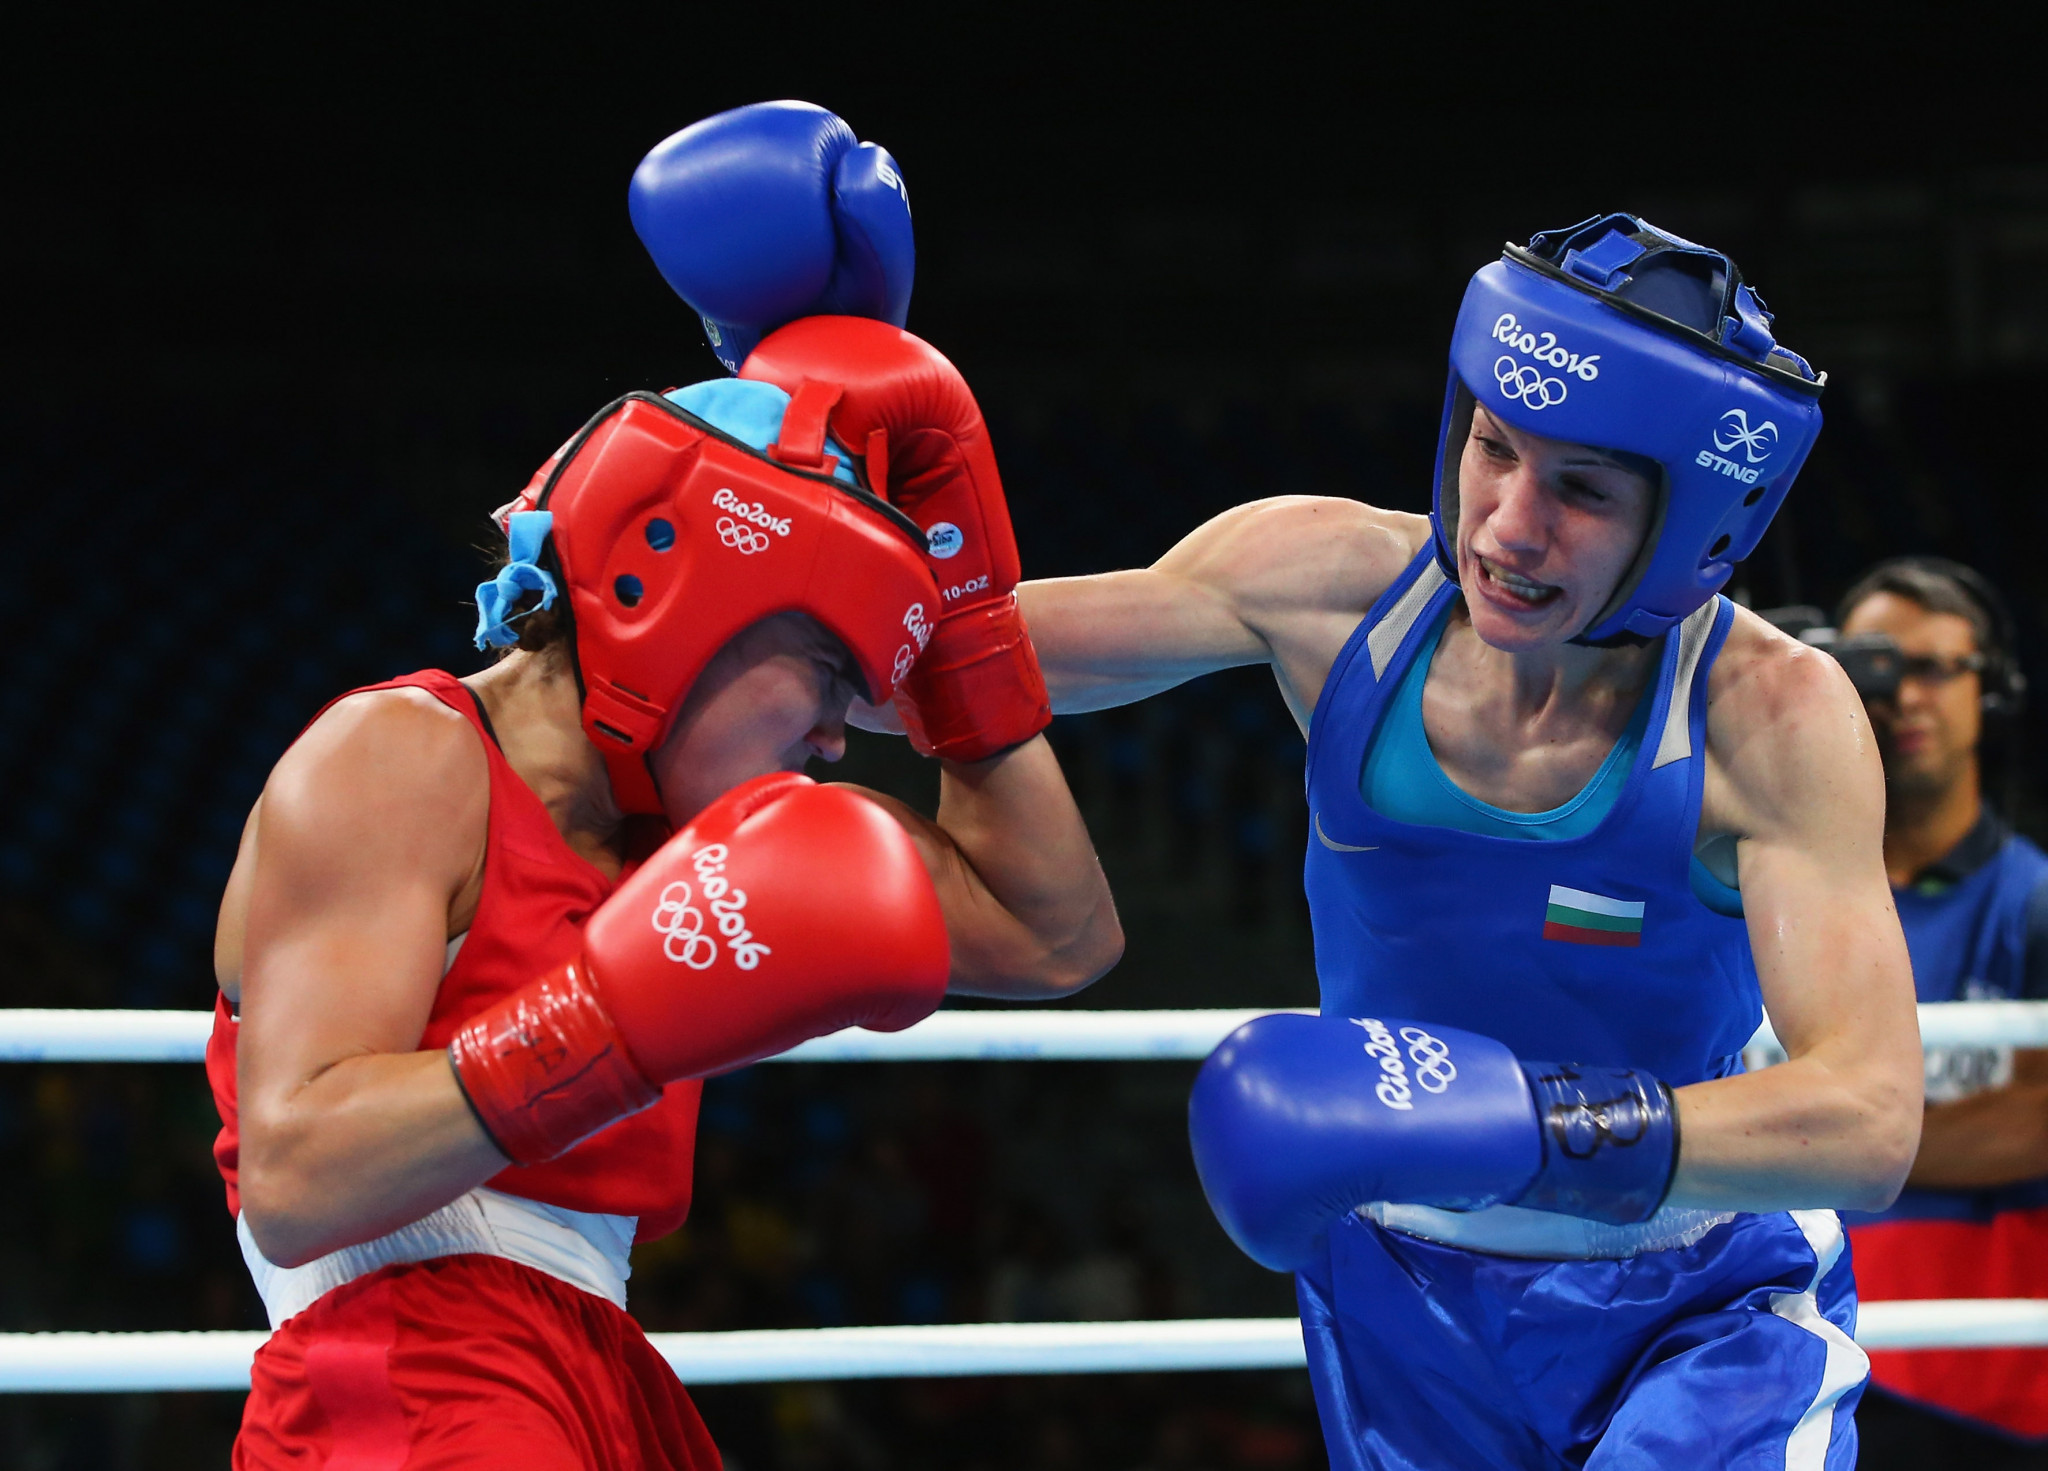 Bulgaria’s Stanimira Petrova accused judges of corruption after losing her preliminary 57 kilograms featherweight bout to home favourite Sonia on day five of the AIBA Women's World Championships in New Delhi ©Getty Images